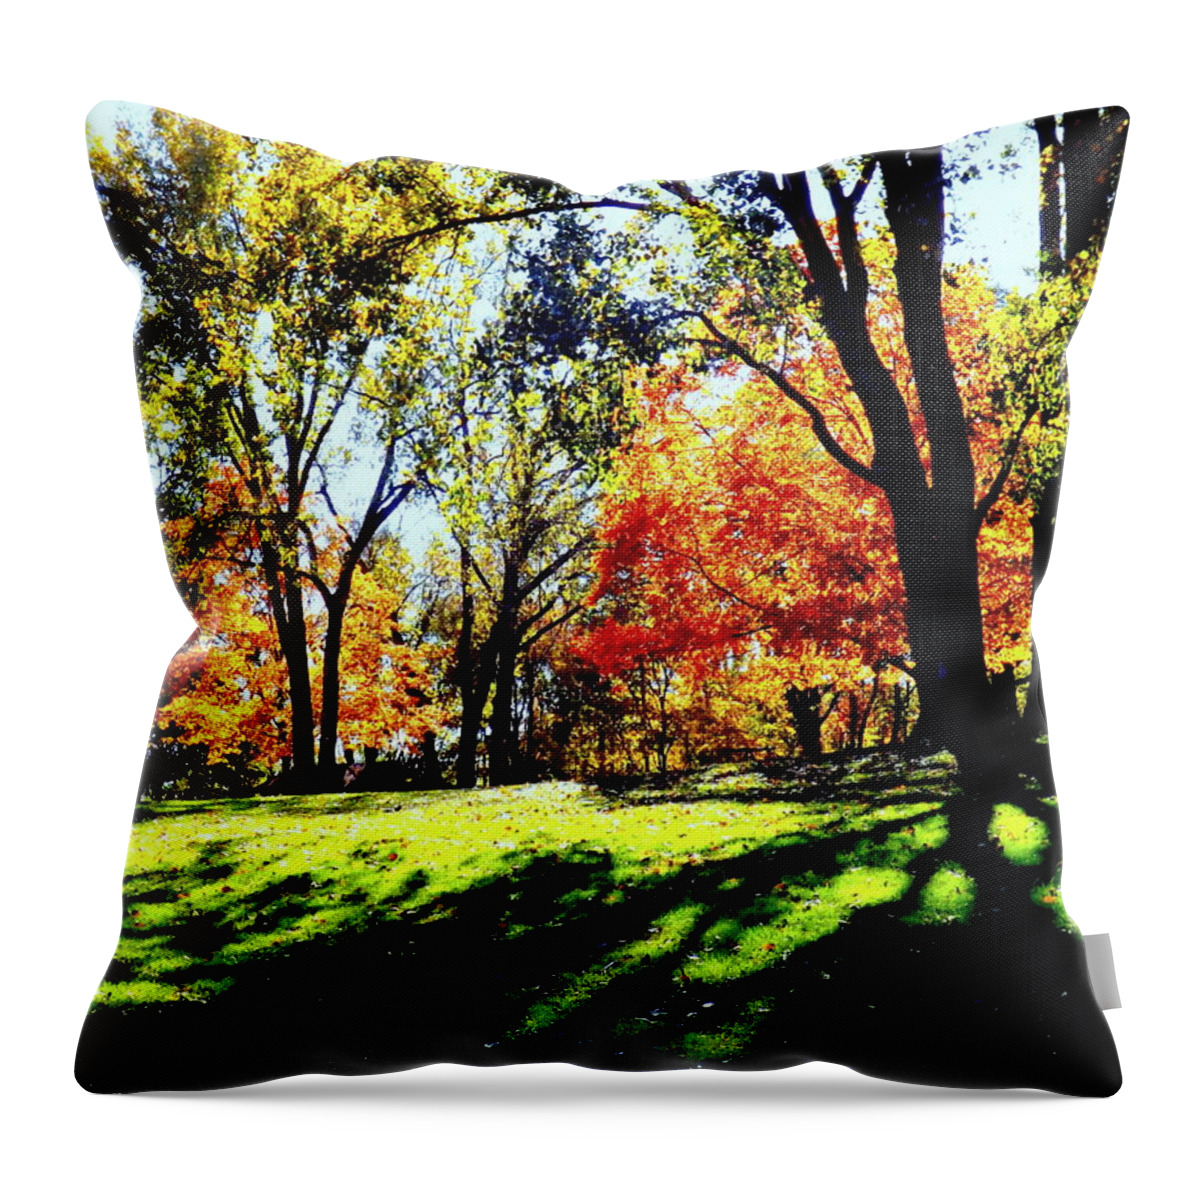 Perfect Picnic Spot Throw Pillow featuring the photograph Perfect Picnic Spot by Darren Robinson